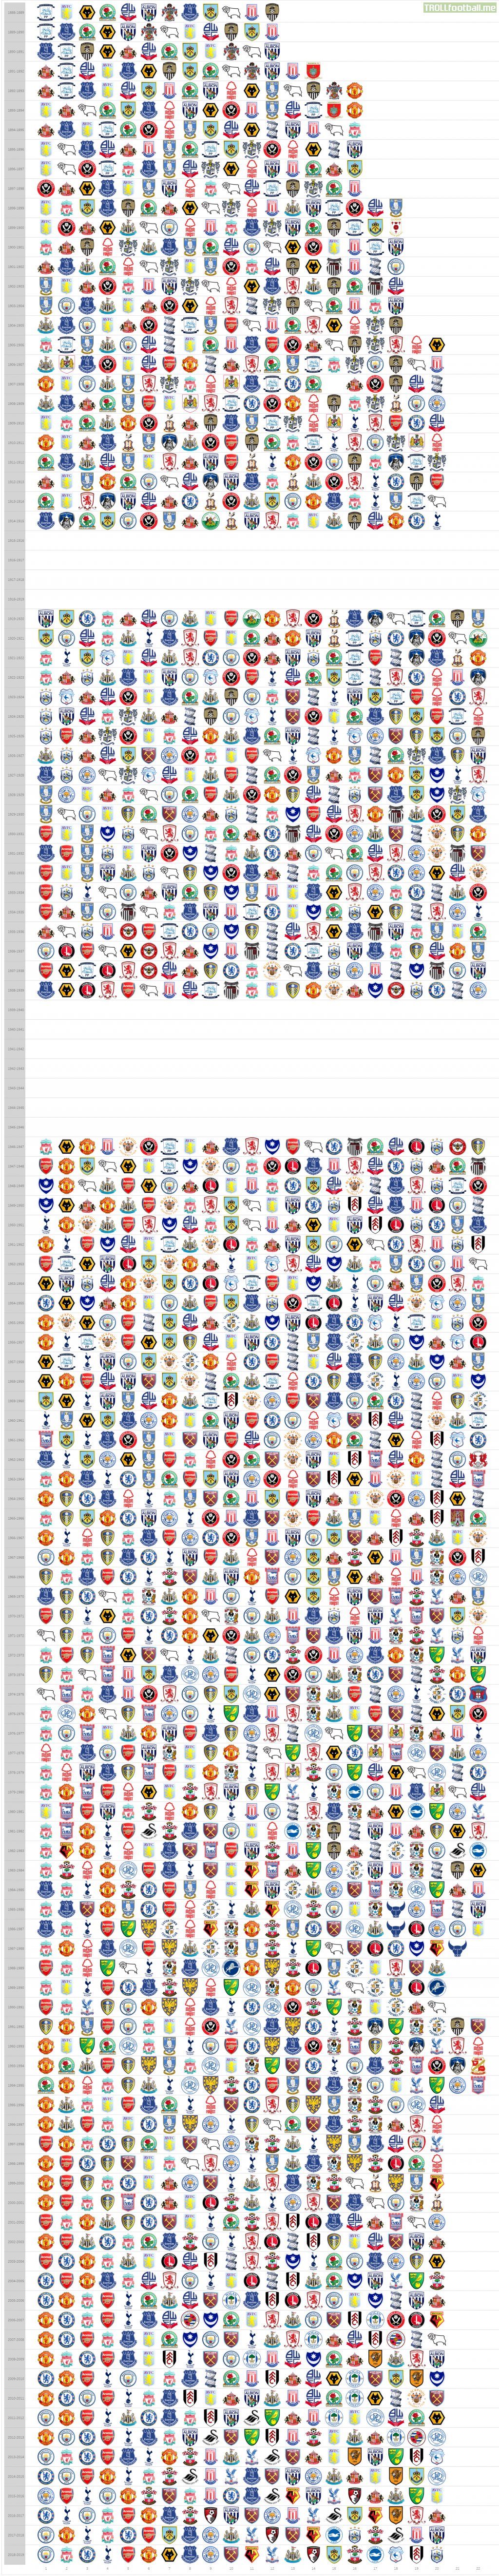 PL results (1888-2019)